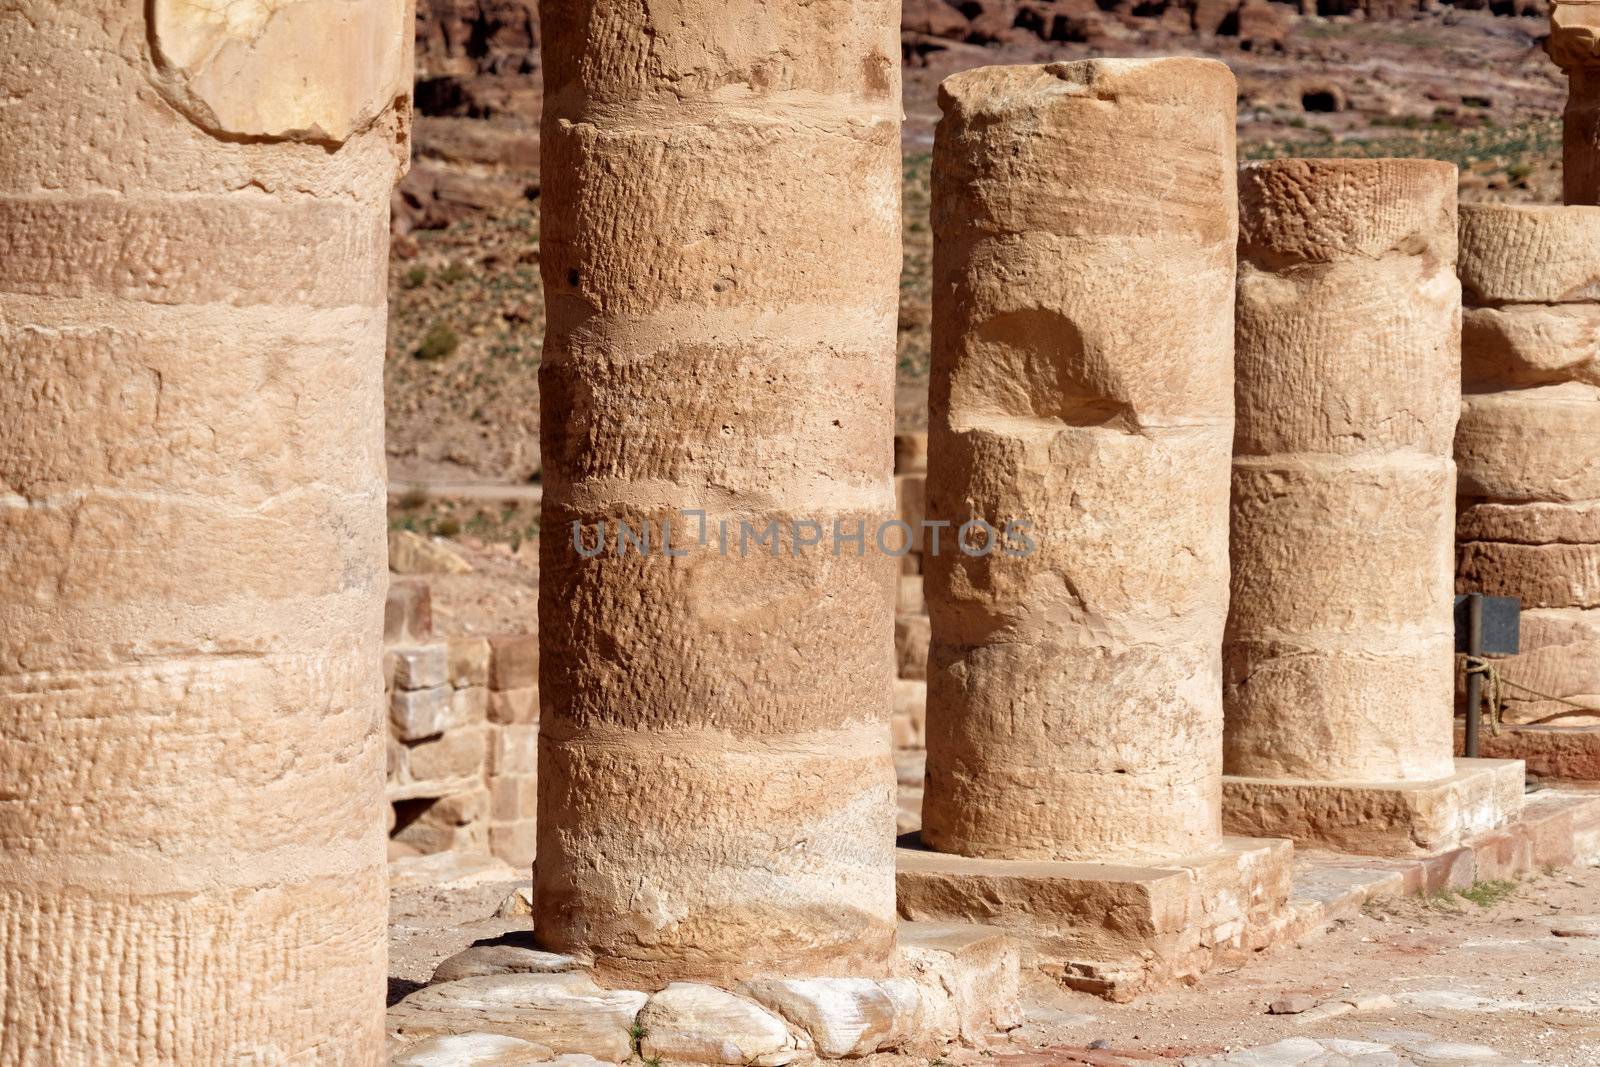 Close-up of Roman columns in the archaeological excavation site of Petra, Jordan by geogif